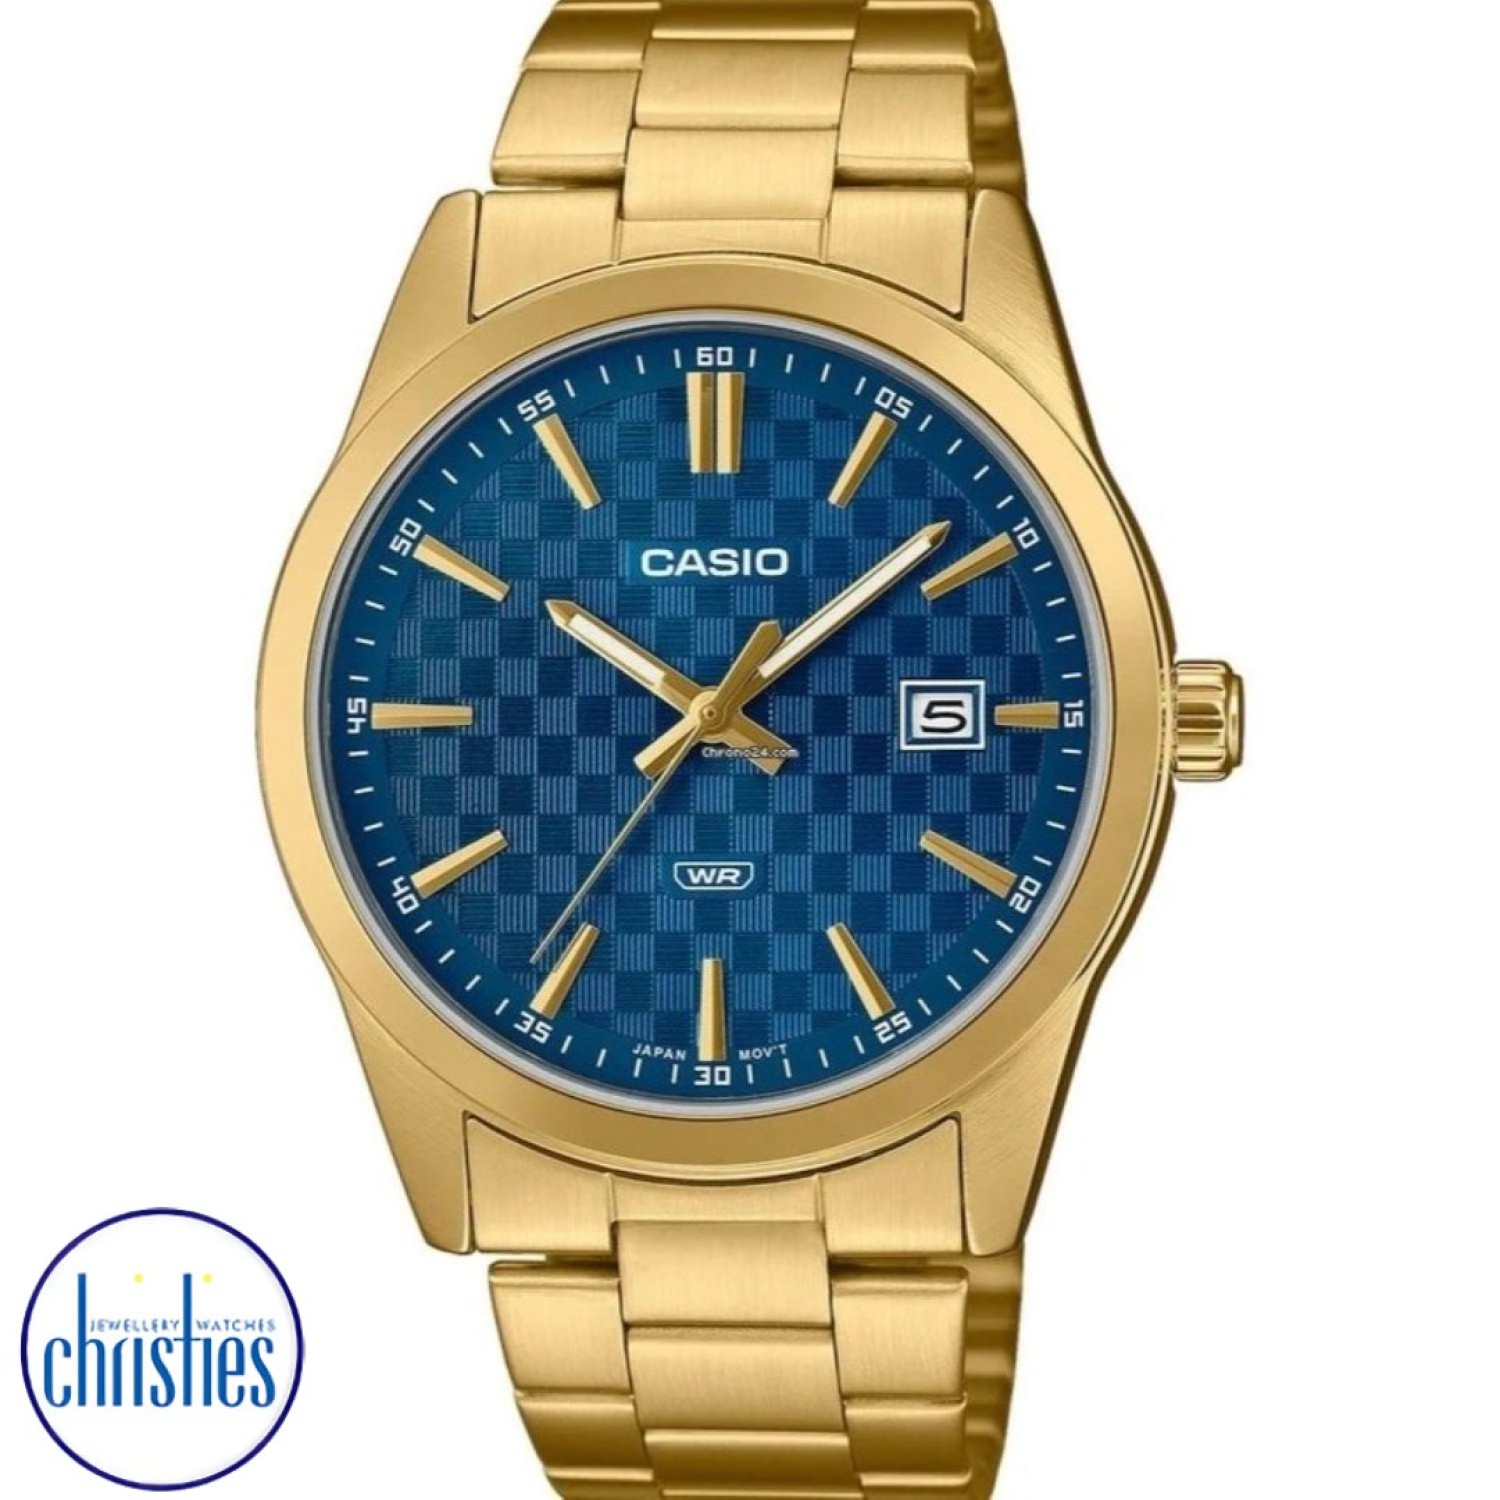 MTPVD03G-2A Casio Blue Dial Watch MTPVD03G-2A Casio New Zealand and Auckland - Free Delivery - Afterpay, Laybuy and Zip  the easy way to pay - Cheap Casio Watches Auckland